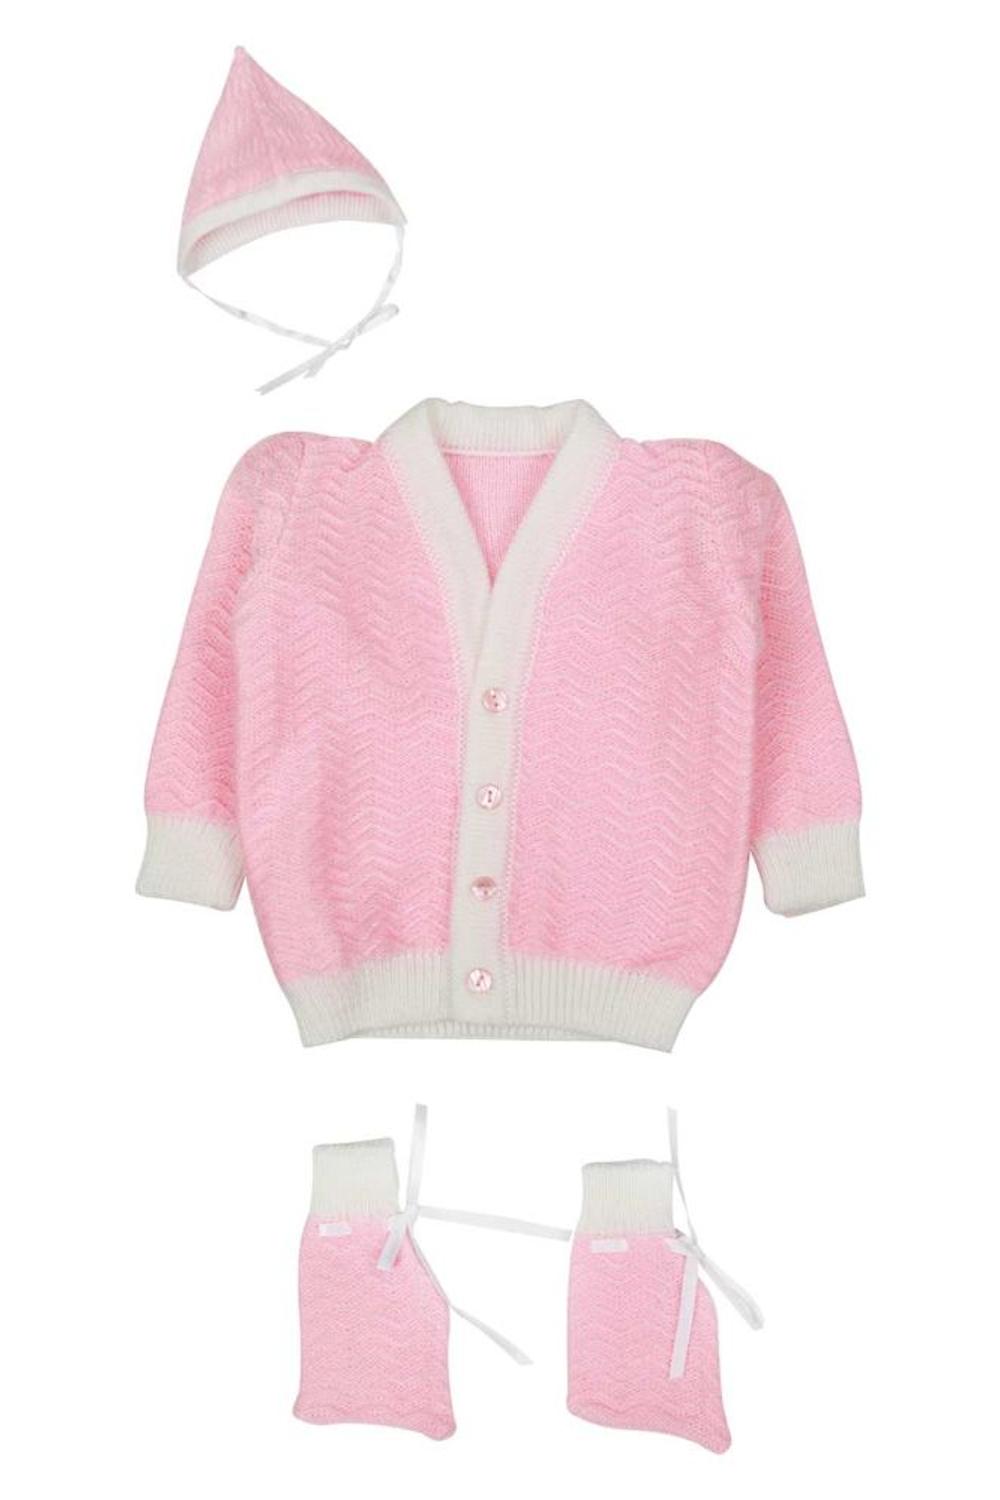 Mee Mee Baby Sweater Sets (Pink White)